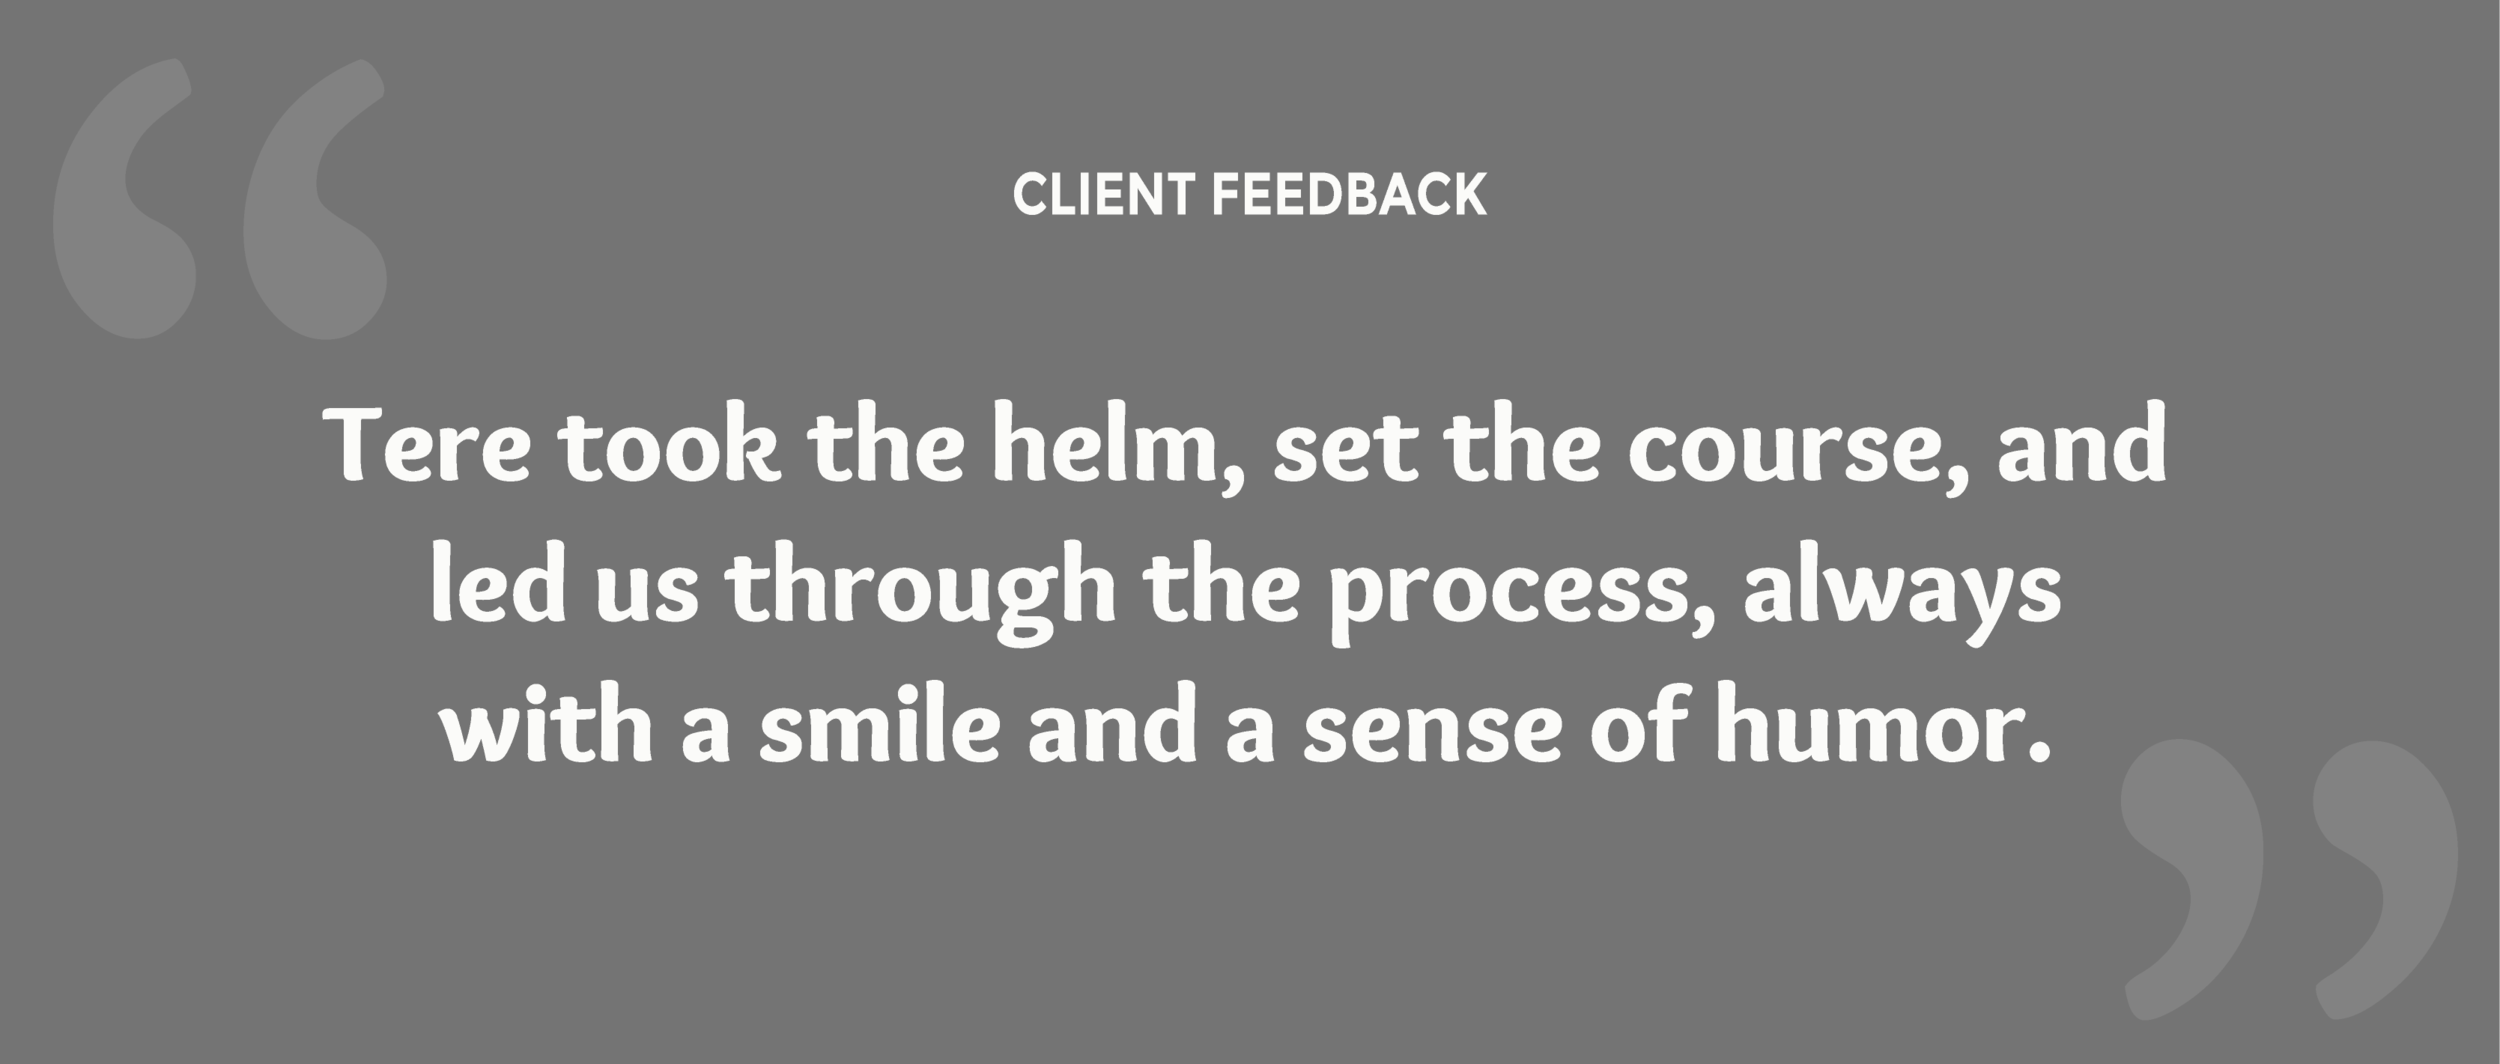 about-client-feedback2.png